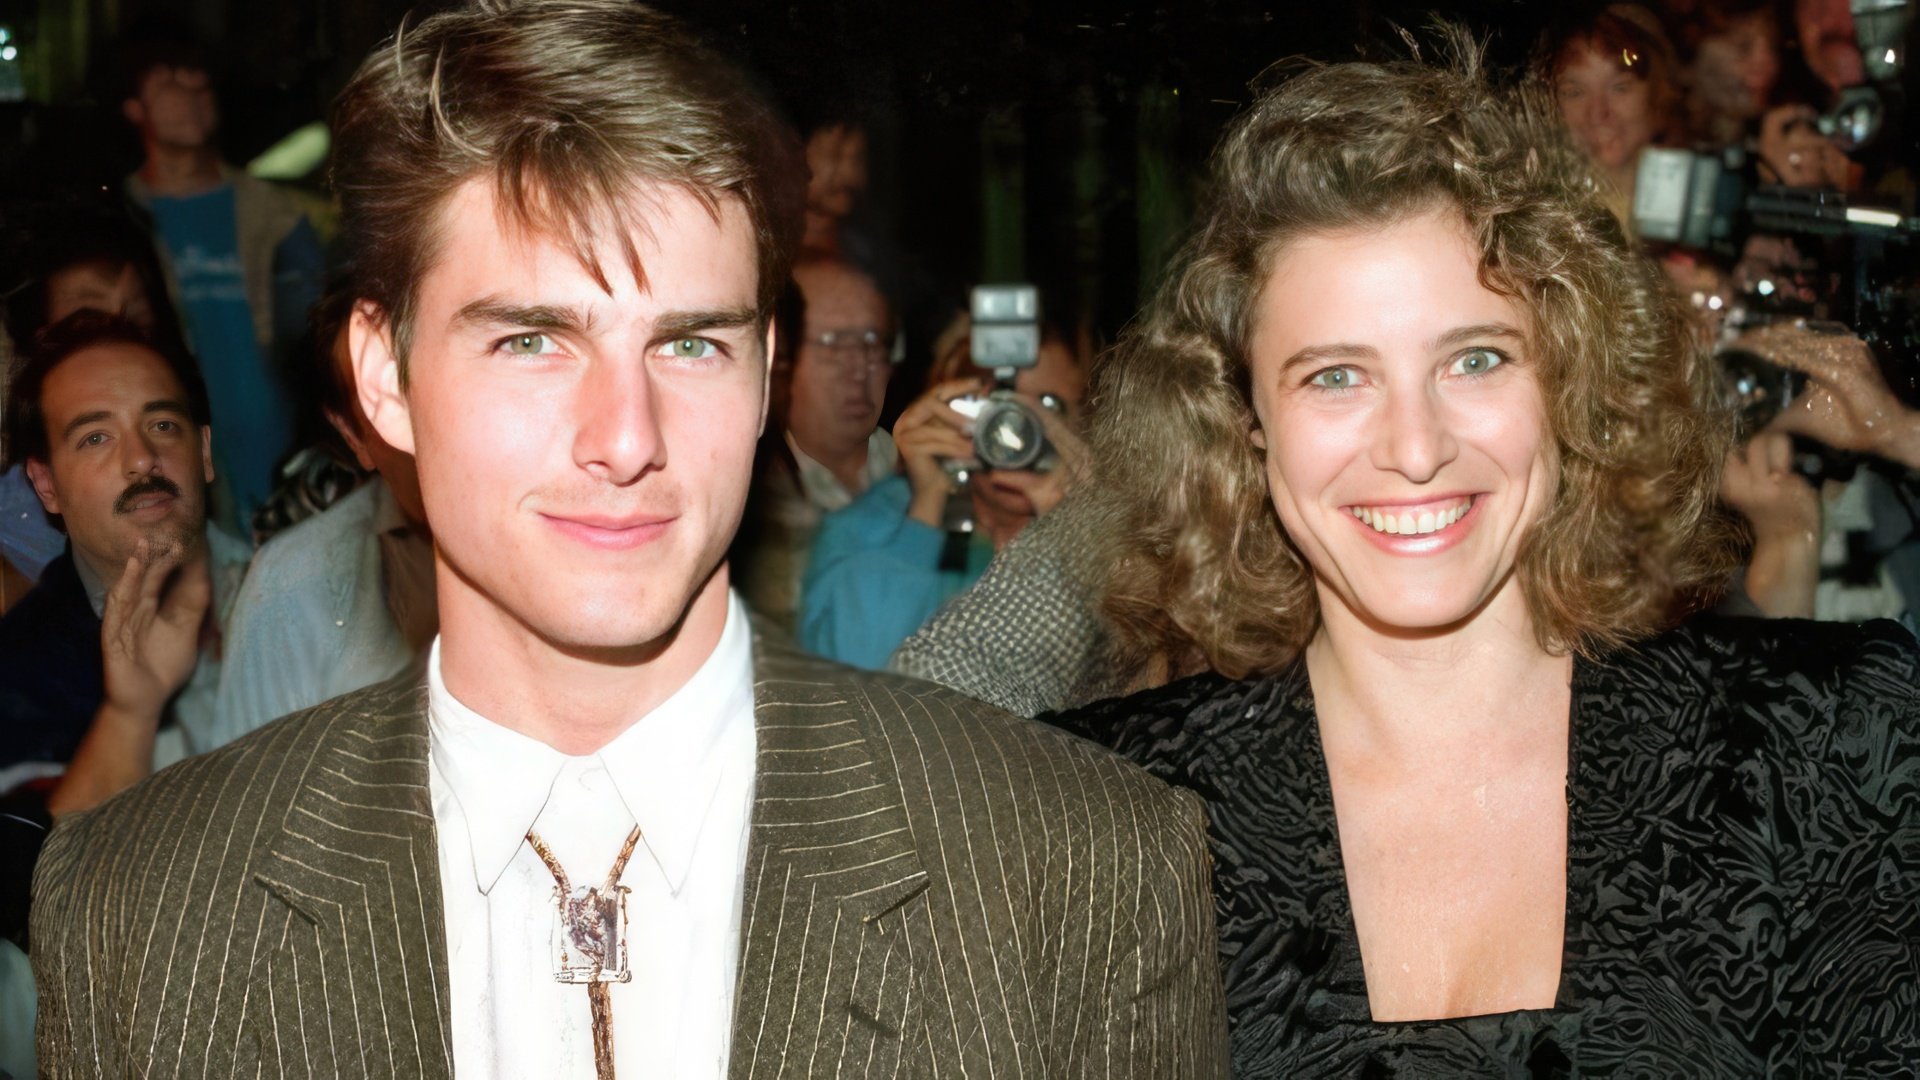 Tom Cruise has converted into Scientology thanks to his girlfriend Mimi Rogers